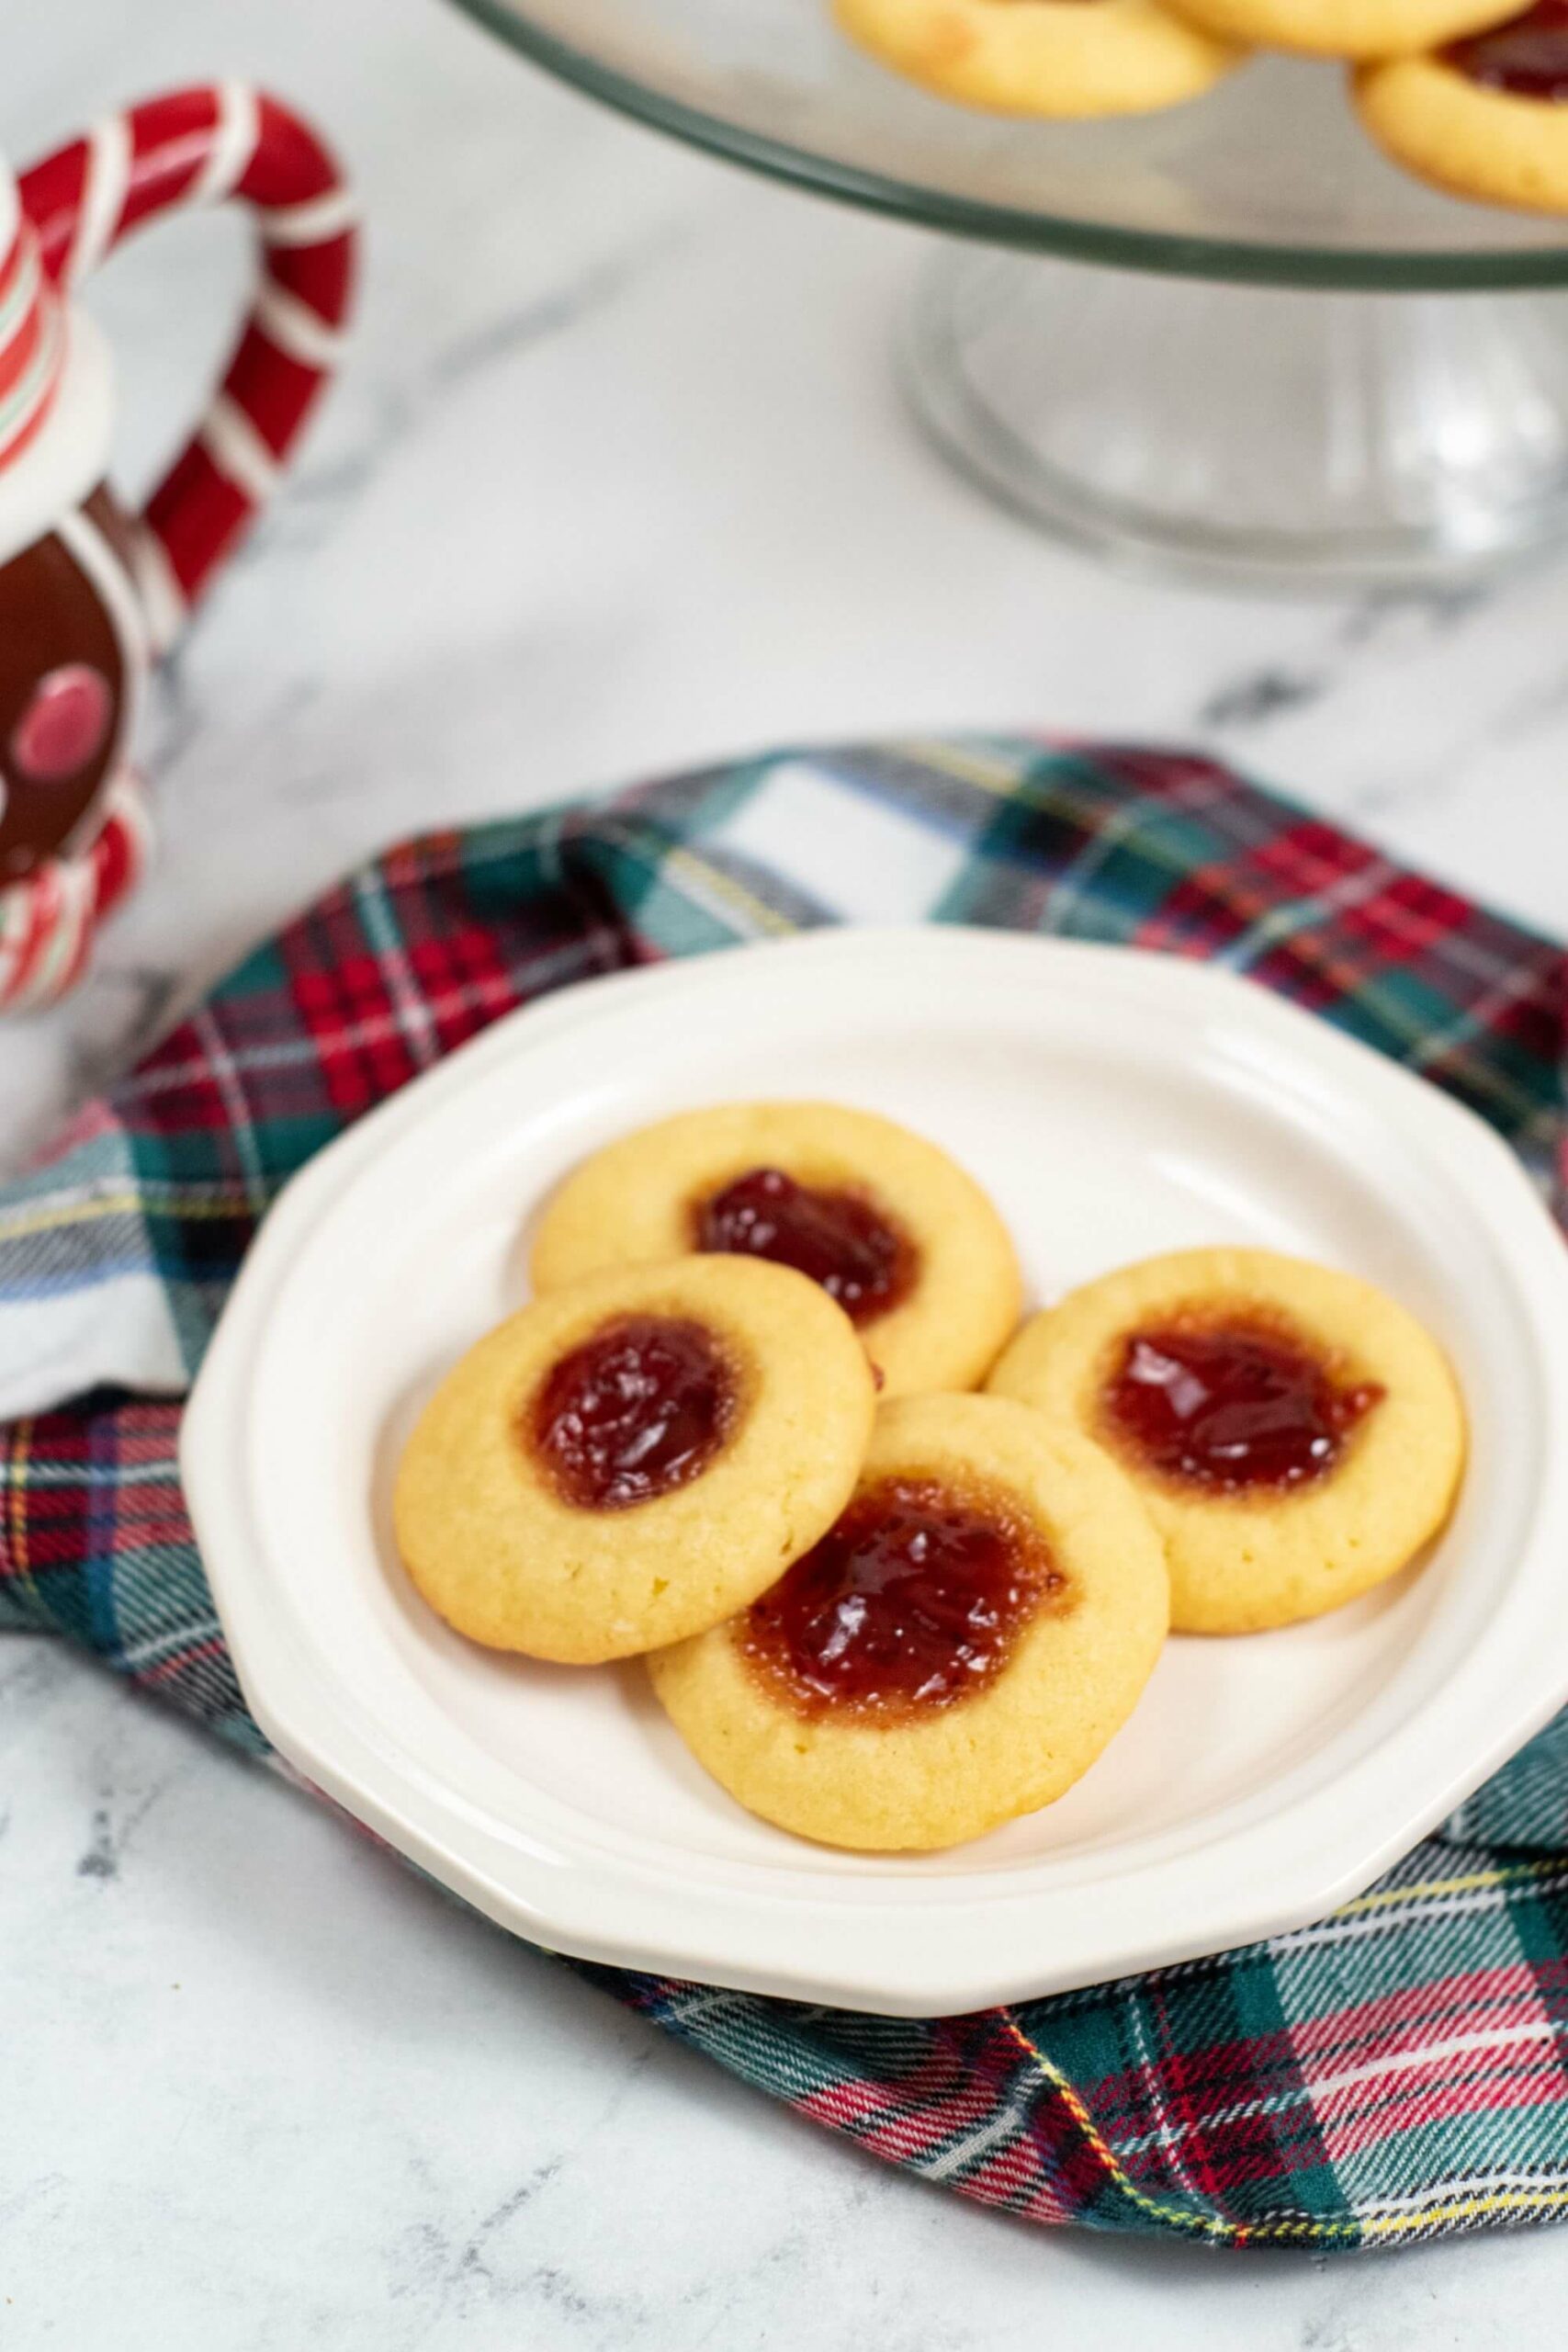 A white plact with 4 Strawberry Jam Cookies (Thumbprints).